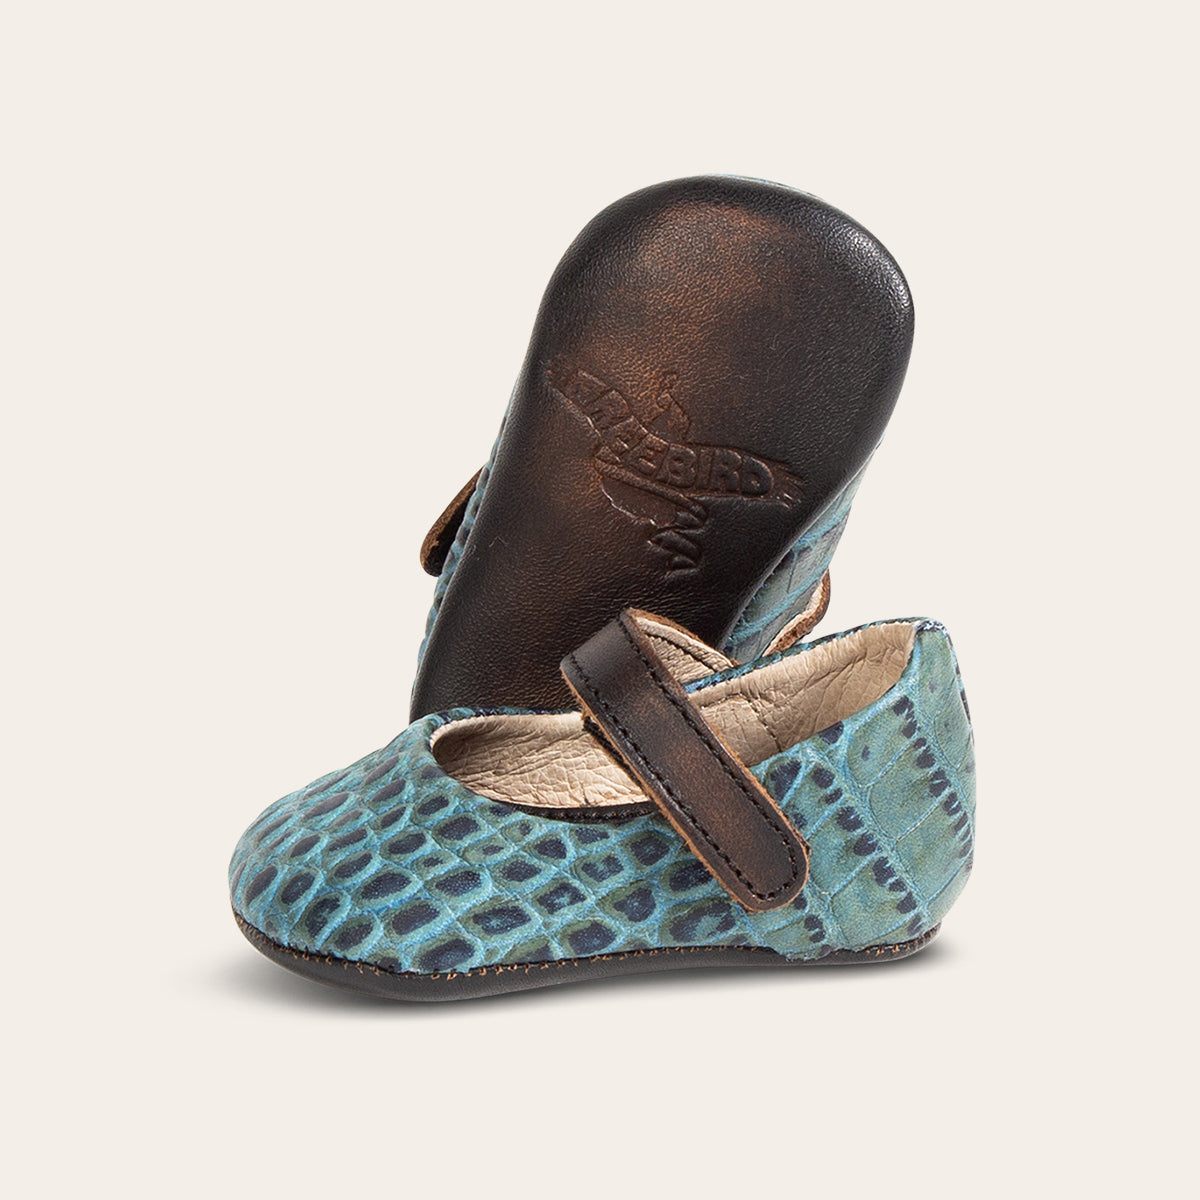 Side view showing leather strap detailing and soft leather imprinted sole on FREEBIRD infant baby jane turquoise leather shoe